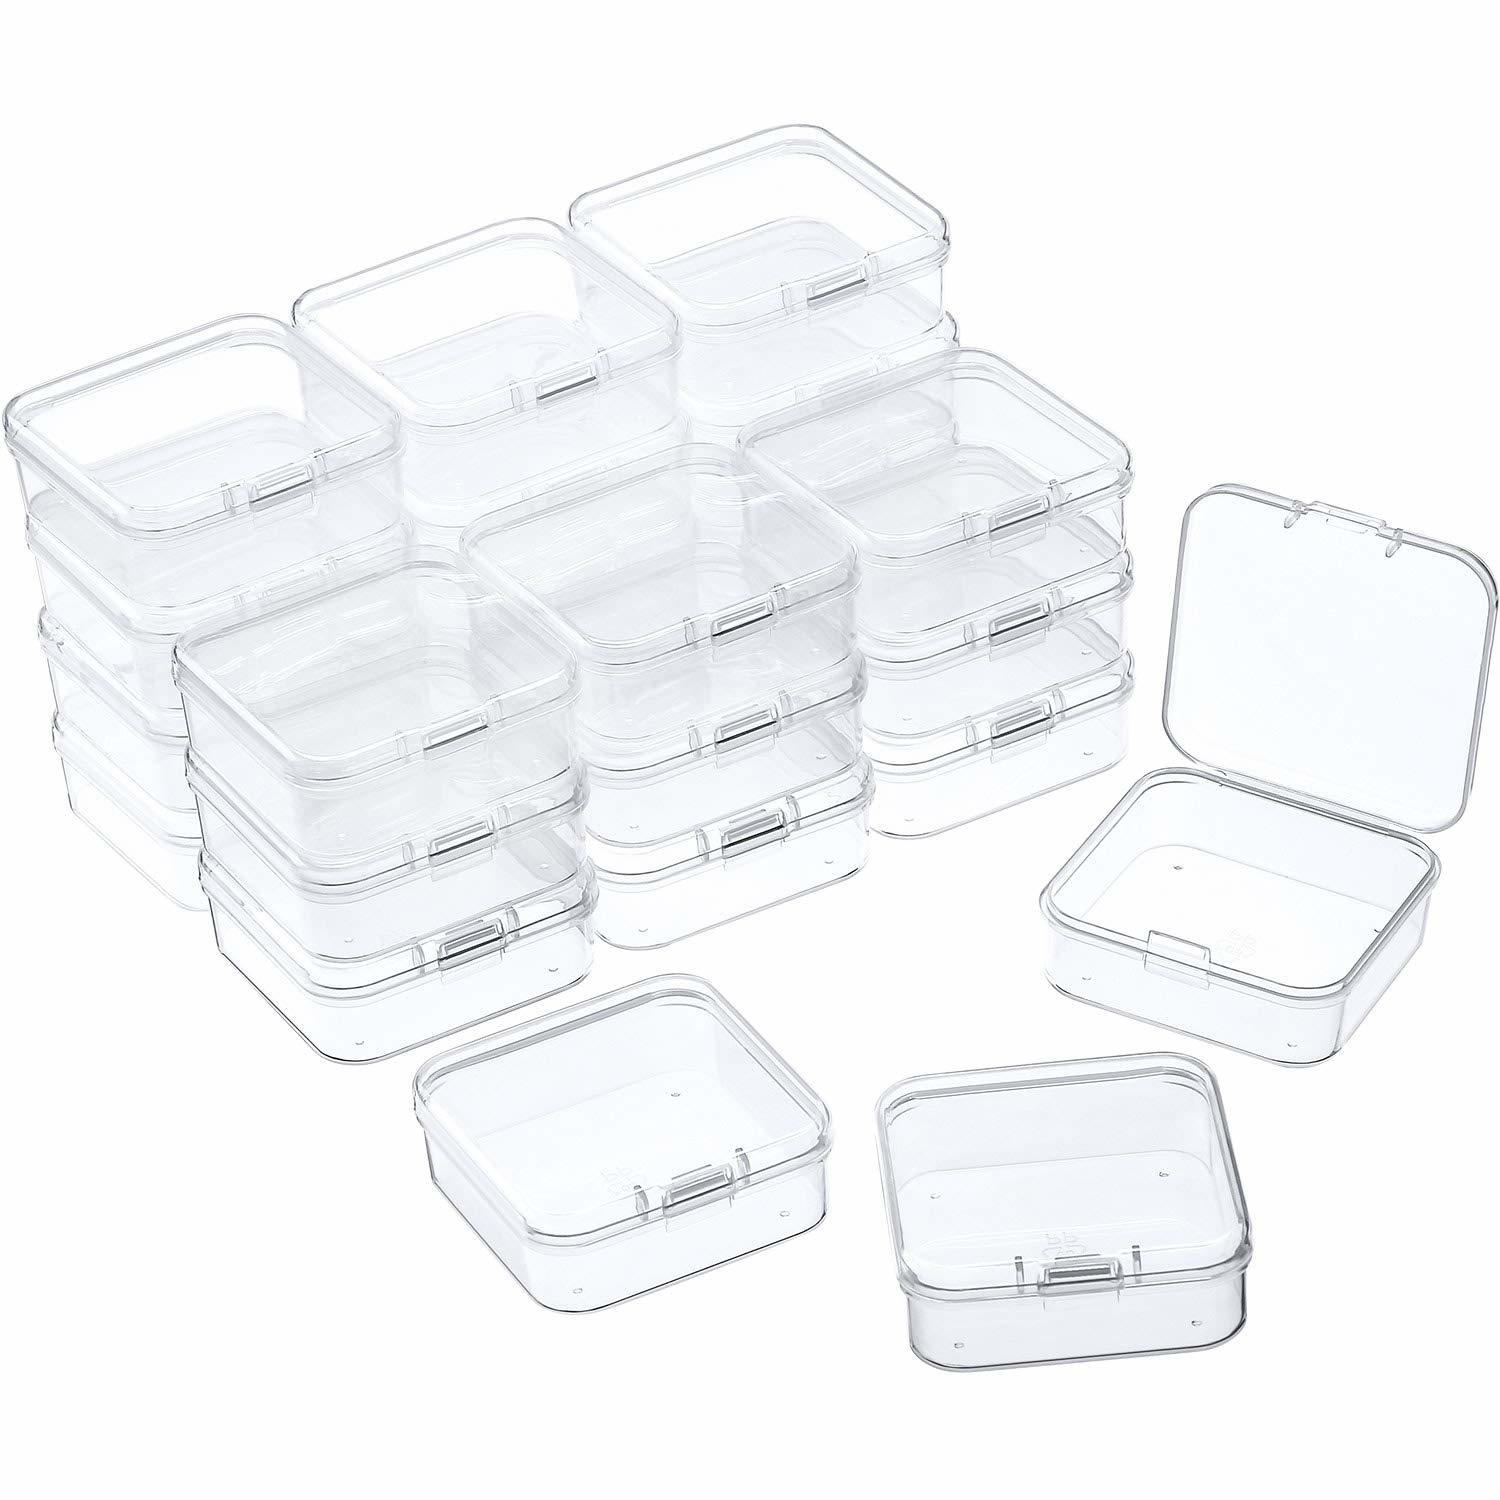 24 Packs Small Clear Plastic Beads Storage Containers Box With Hinged Lid For St - $25.99